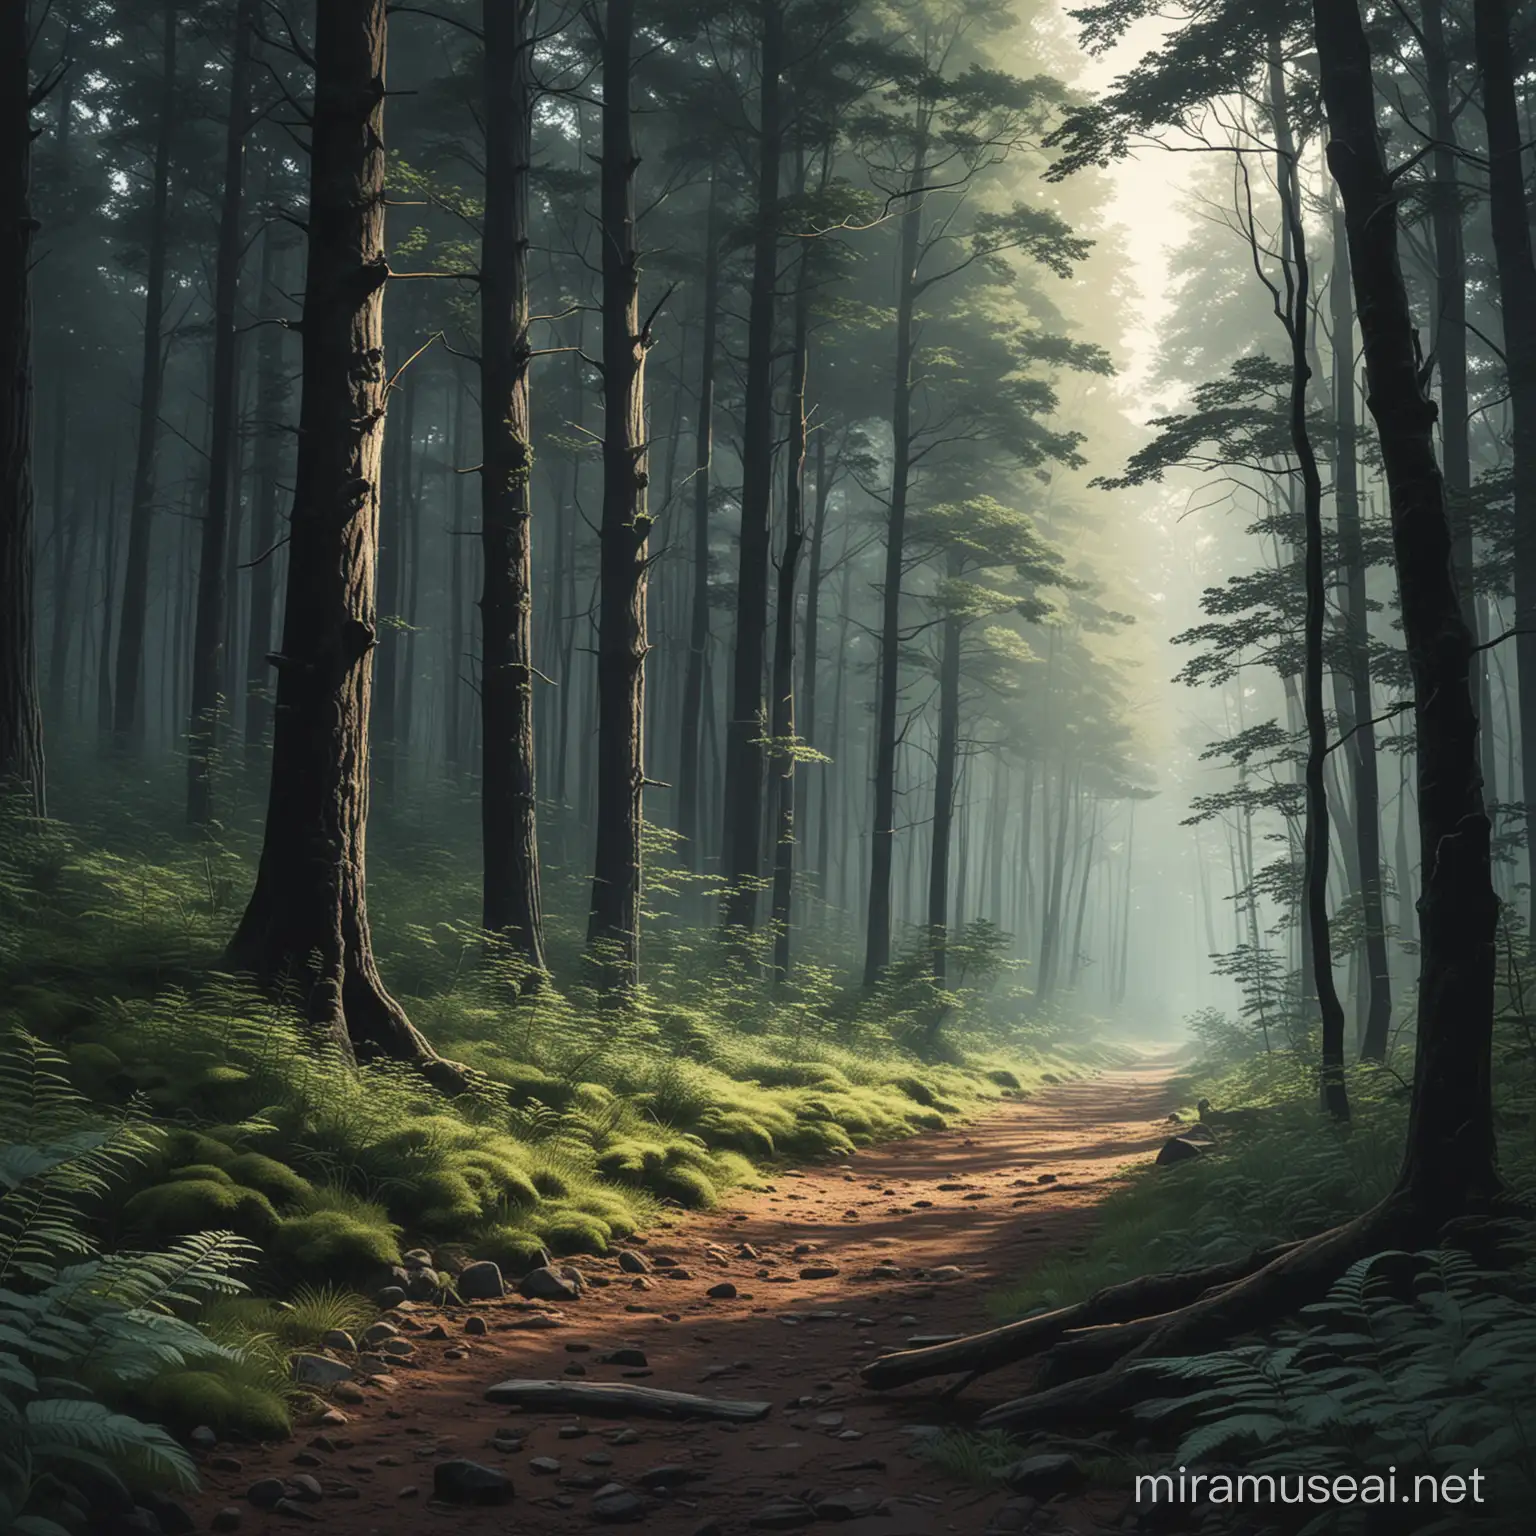 Generate a VECTOR image of a serene forest scene using only 2 or 3 colors. The forest should have a calming and safe ambiance. Ensure that the bottom part of the image is black to represent the ground. Focus on depicting the tranquility and beauty of nature within these constraints.